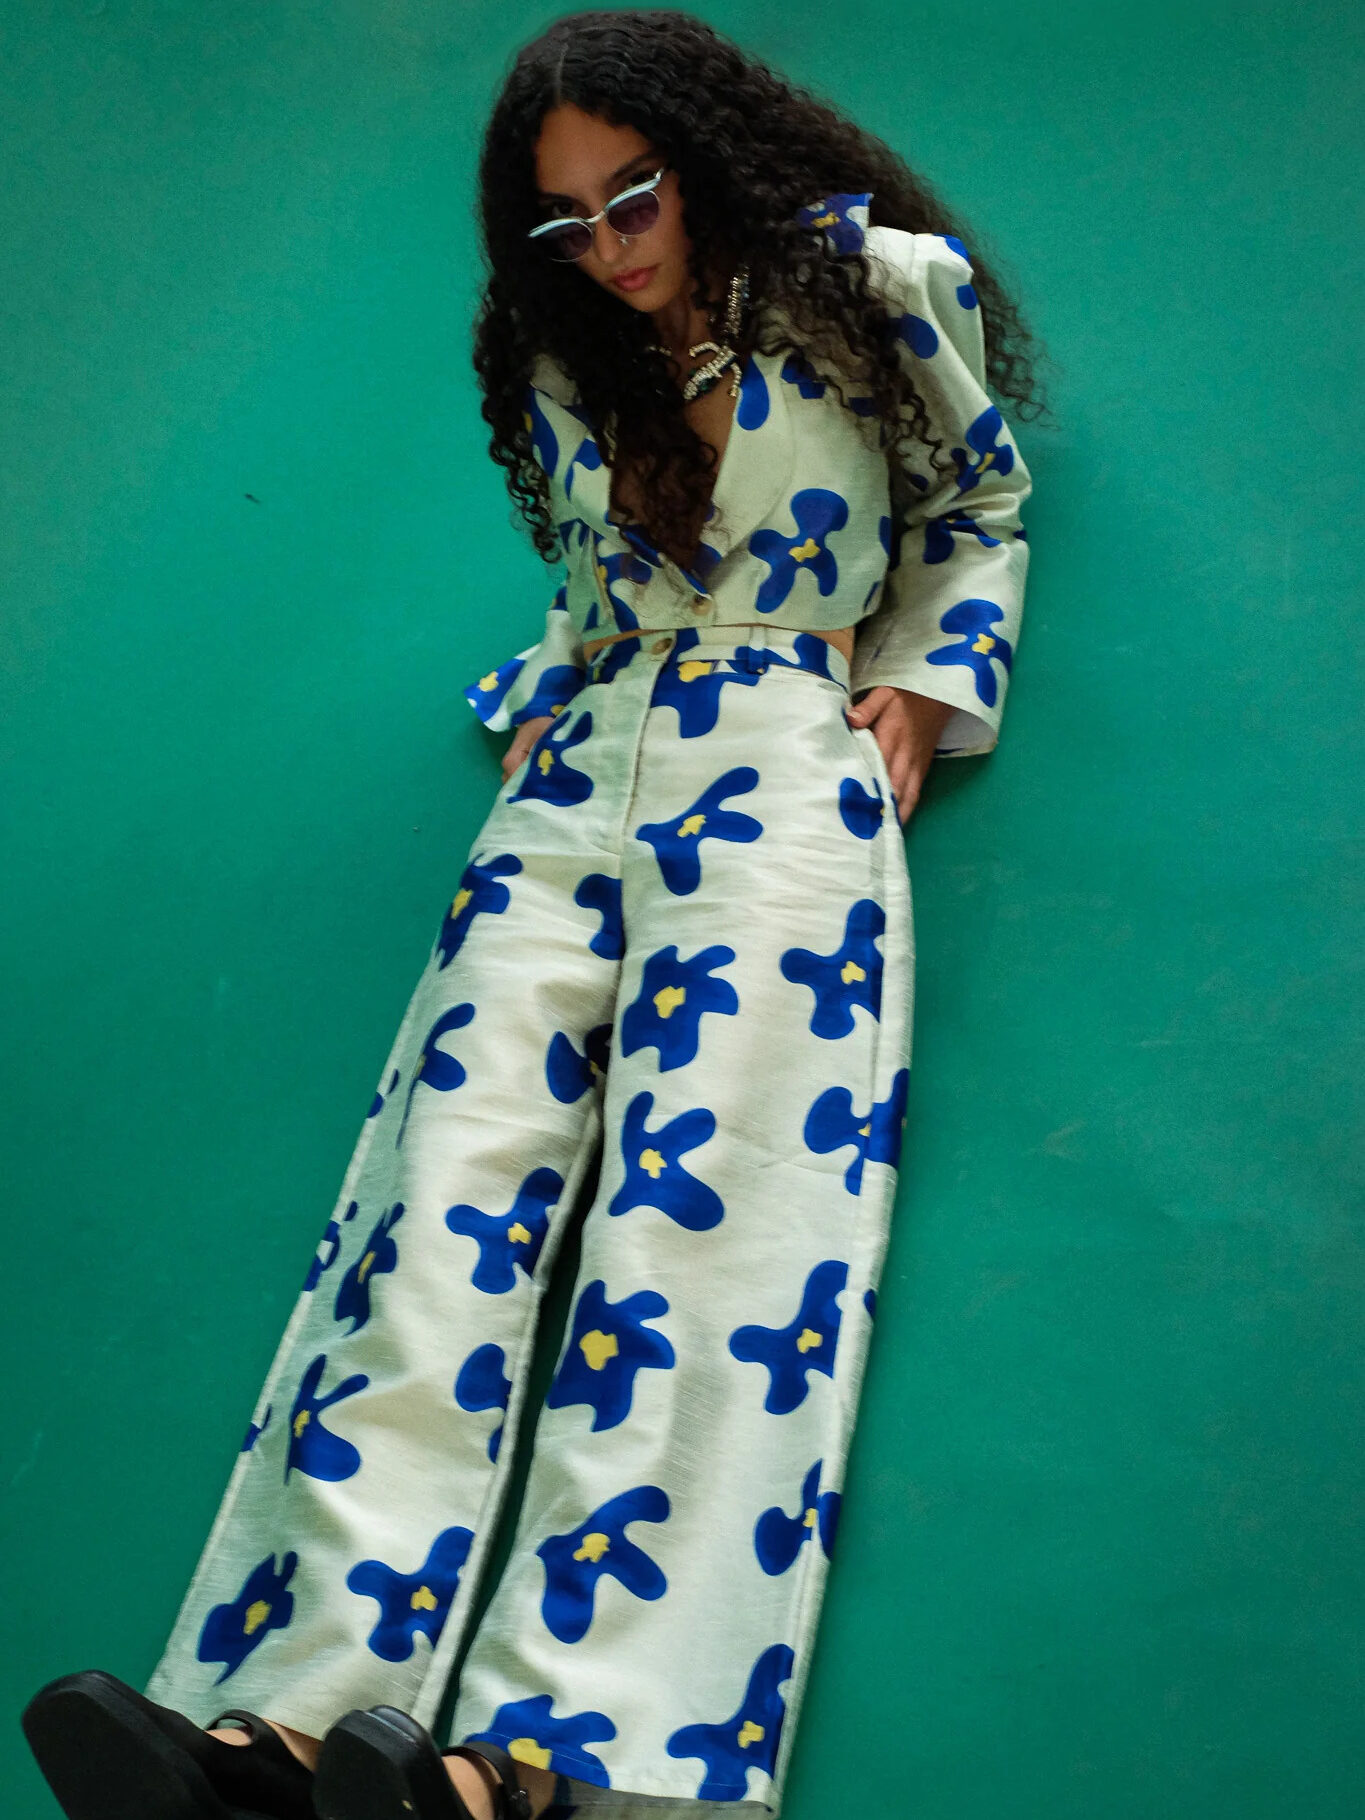 A model, laying seated wearing Selva Negra's matching coco jacket and migo pants in white with blue flowers.